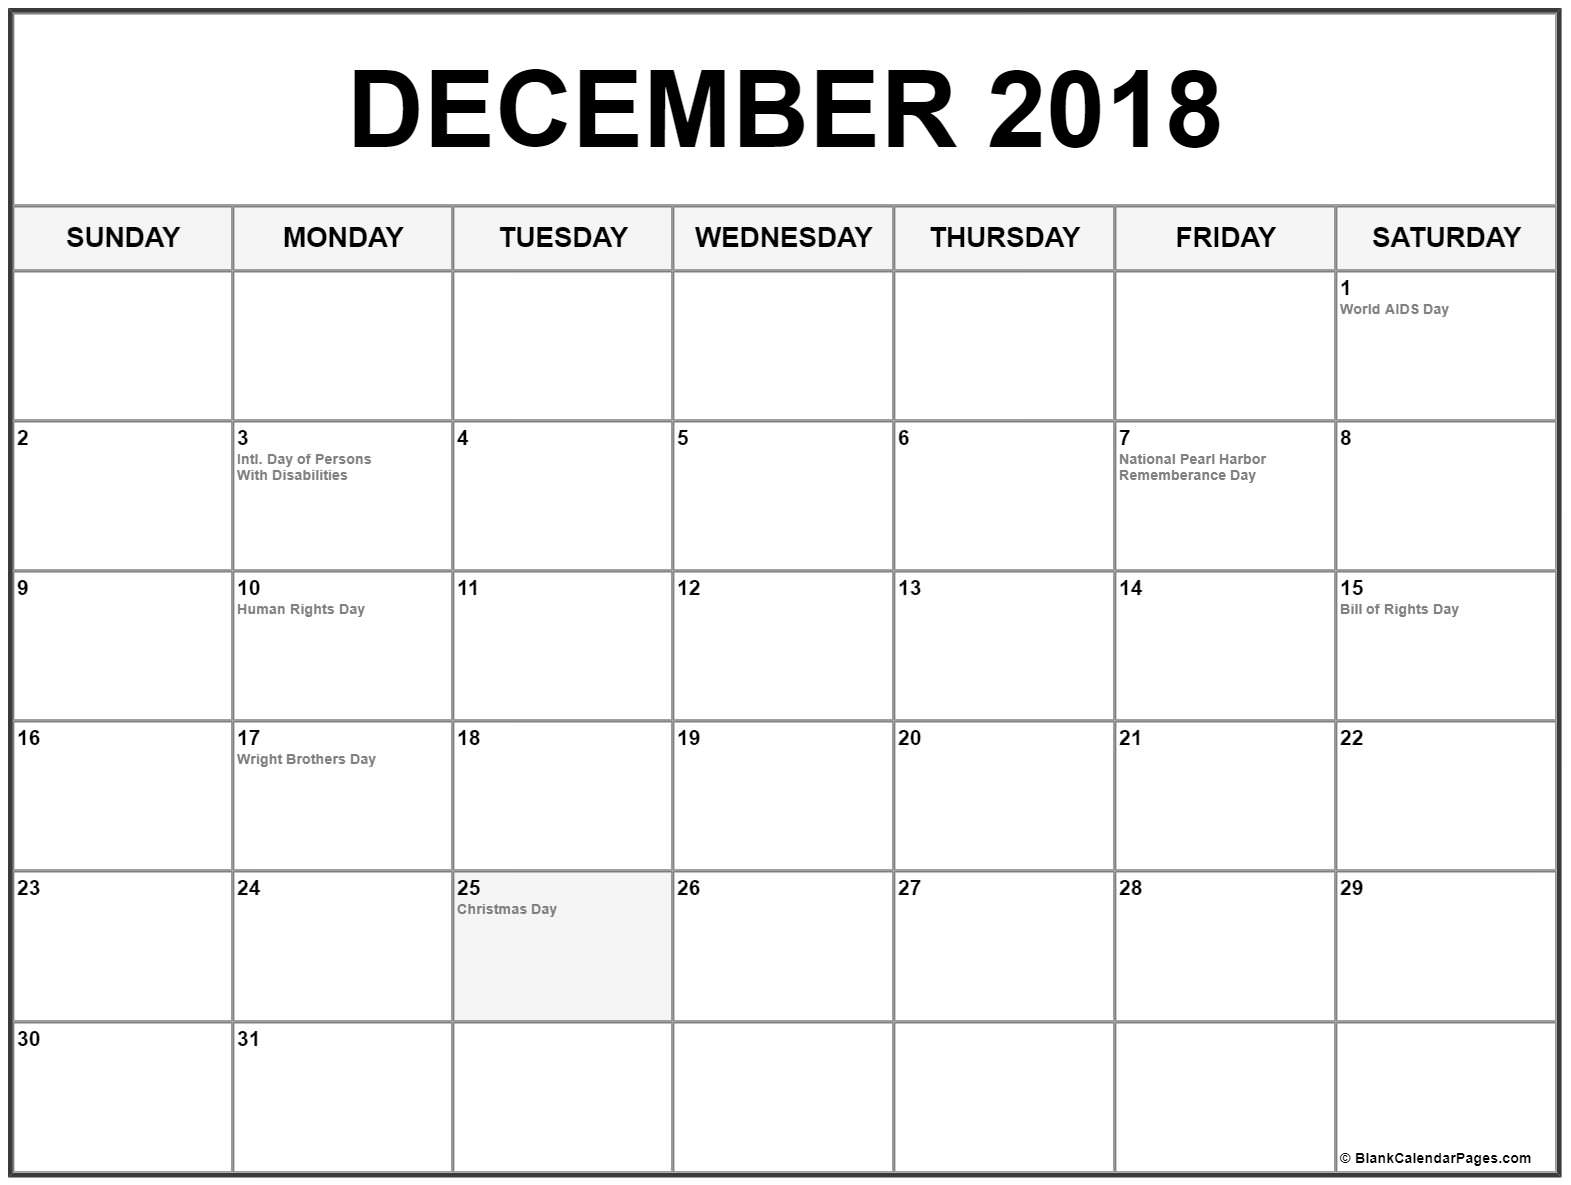 Collection Of December 2018 Calendars With Holidays Calendar Of Holidays In December